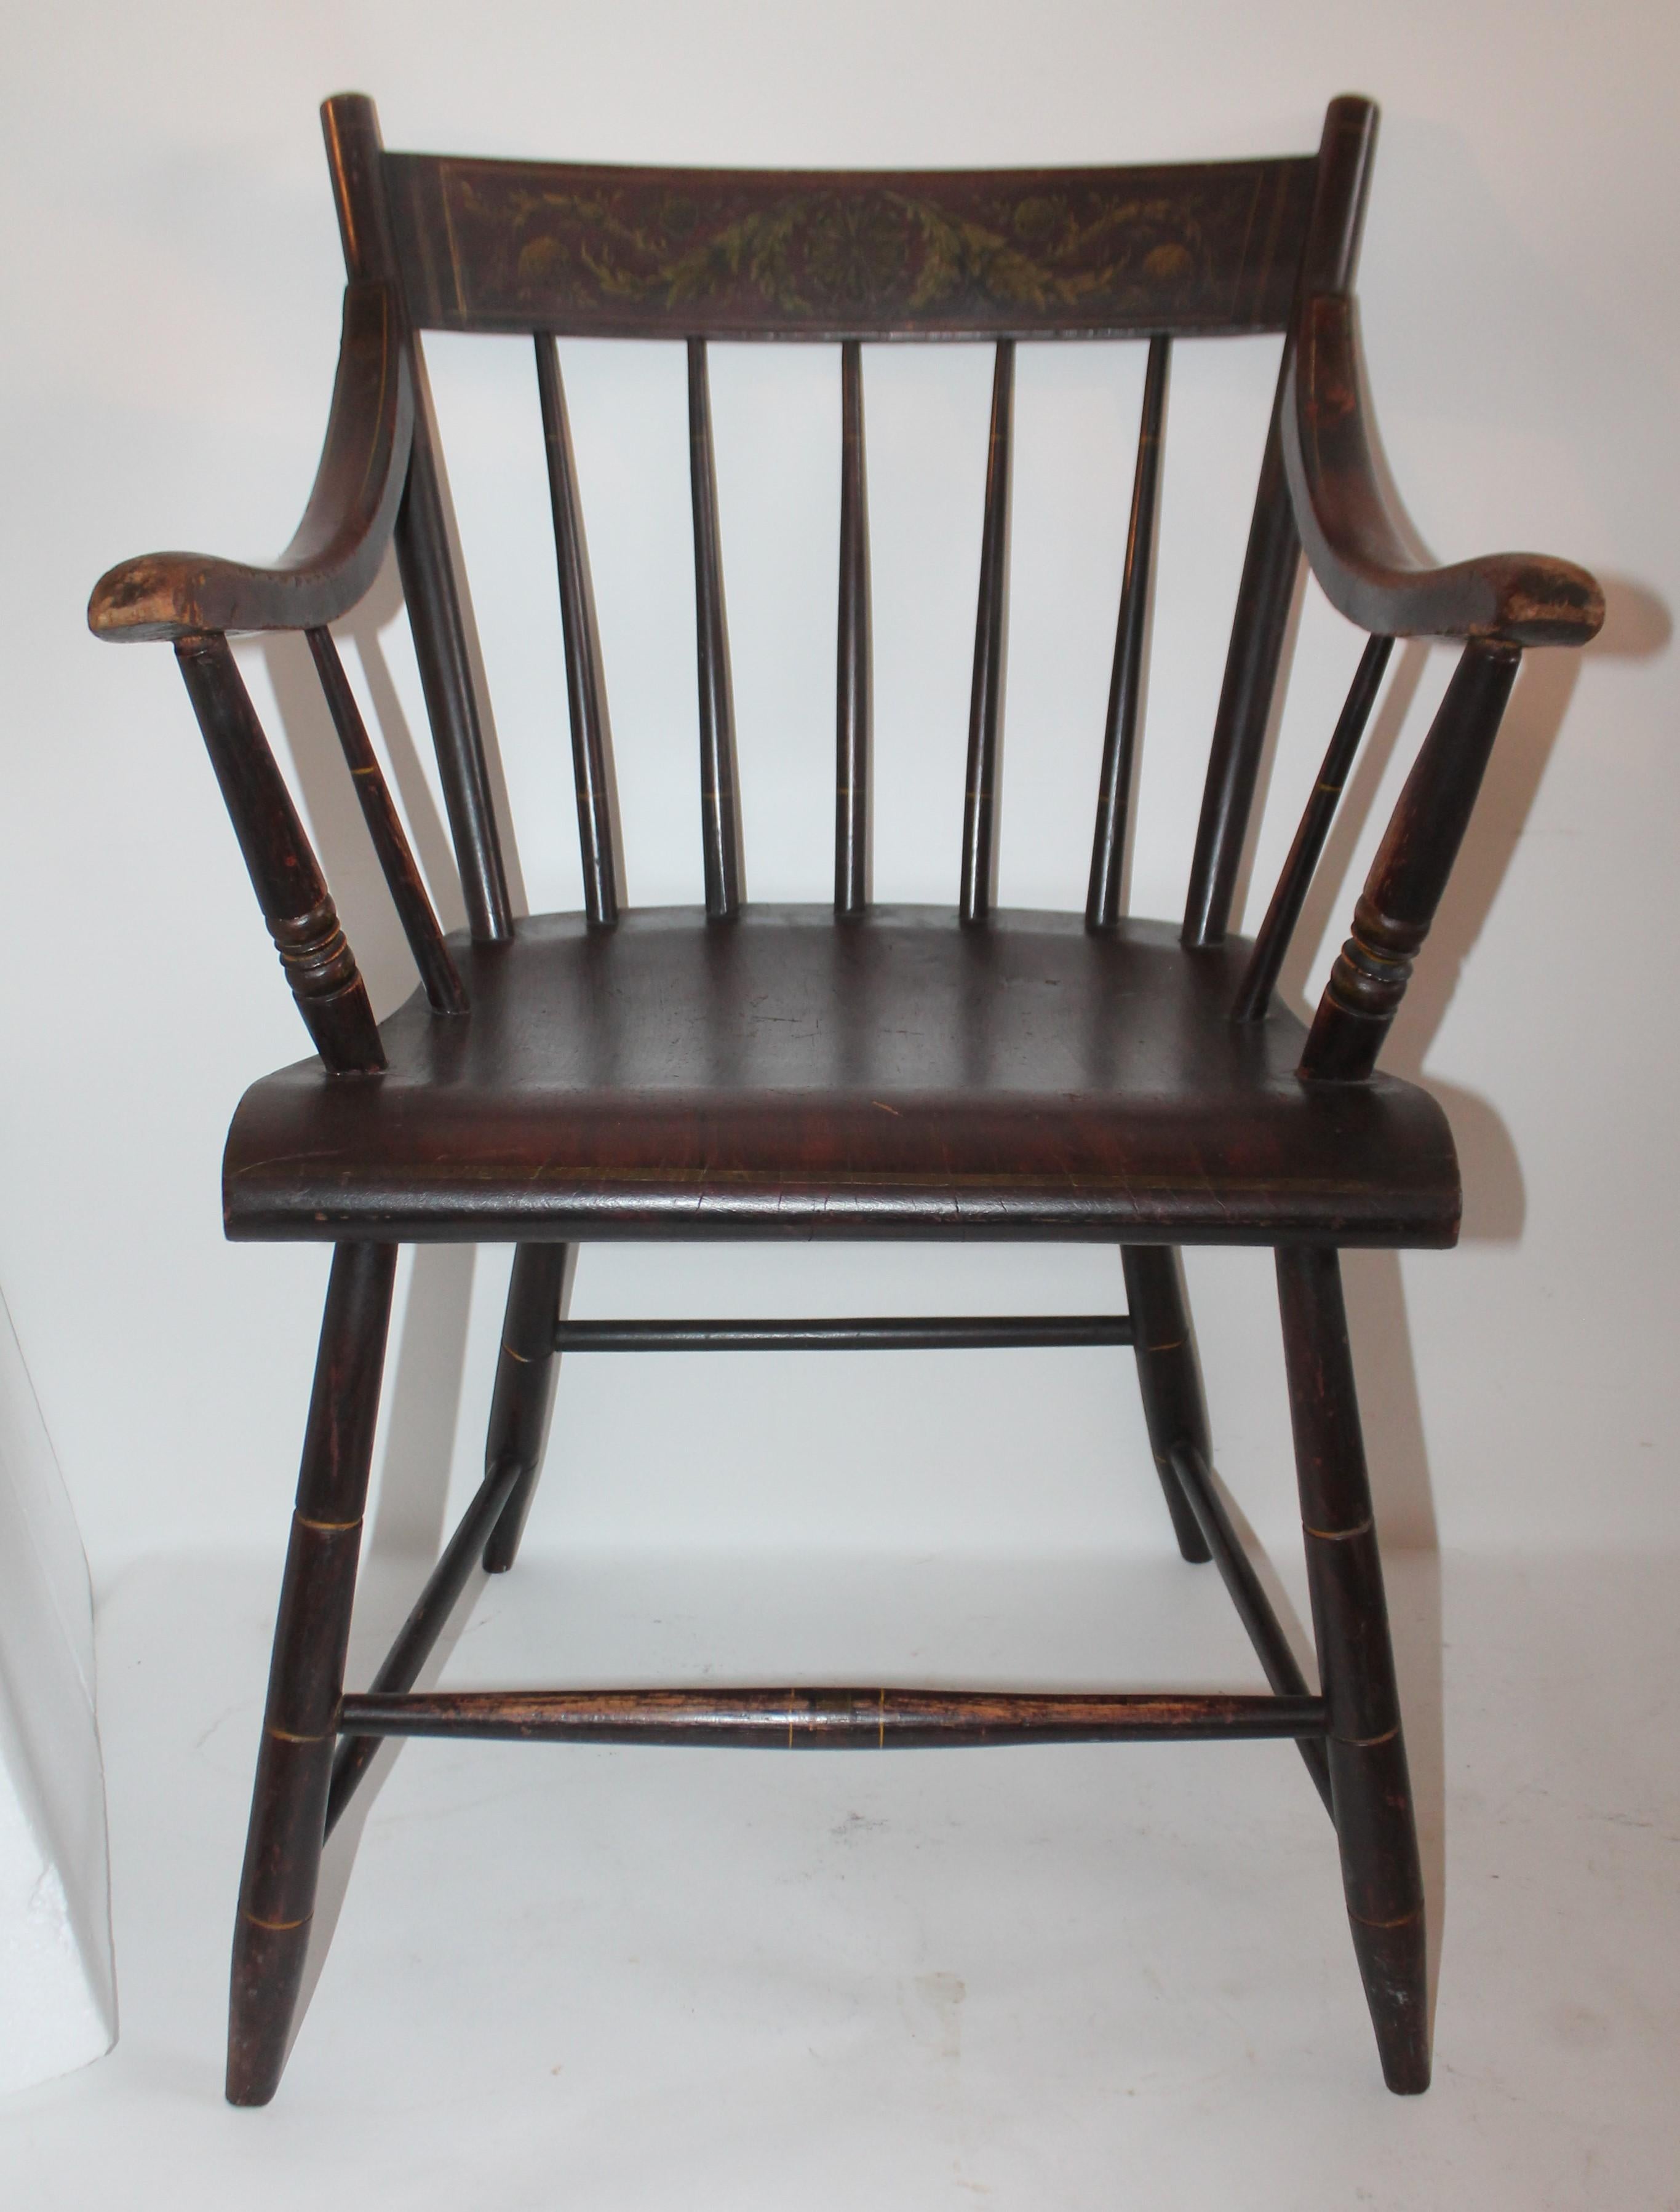 Early 19th century original painted Hitchcock armchair with a decorated inside back. The condition is very good and sturdy. The back ground has a wonderful reddish brown surface. The paint is in an undisturbed patina.